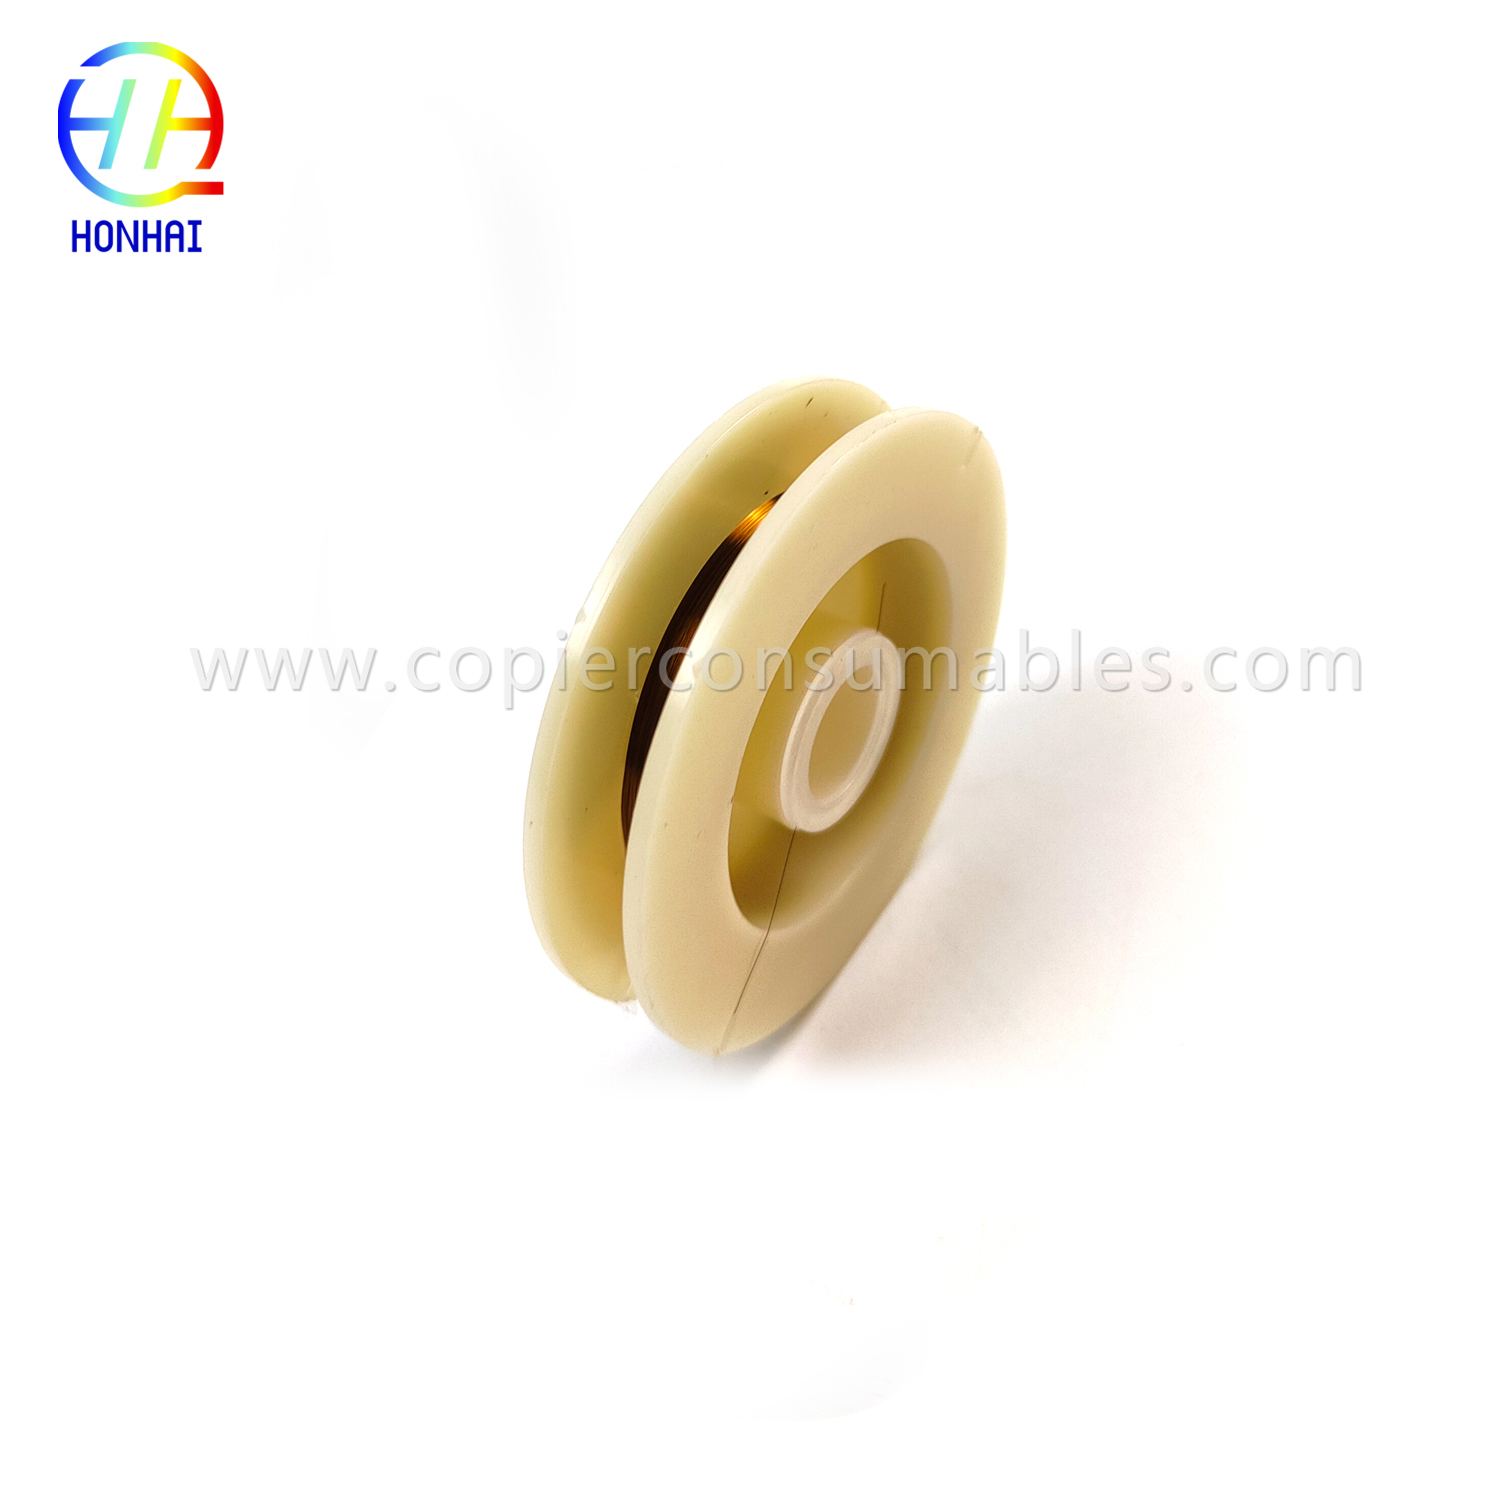 https://www.copierconsumables.com/wire-electrode-for-canon-ir5000-6275-8205-6075-8105-8505-8295-6575-product/